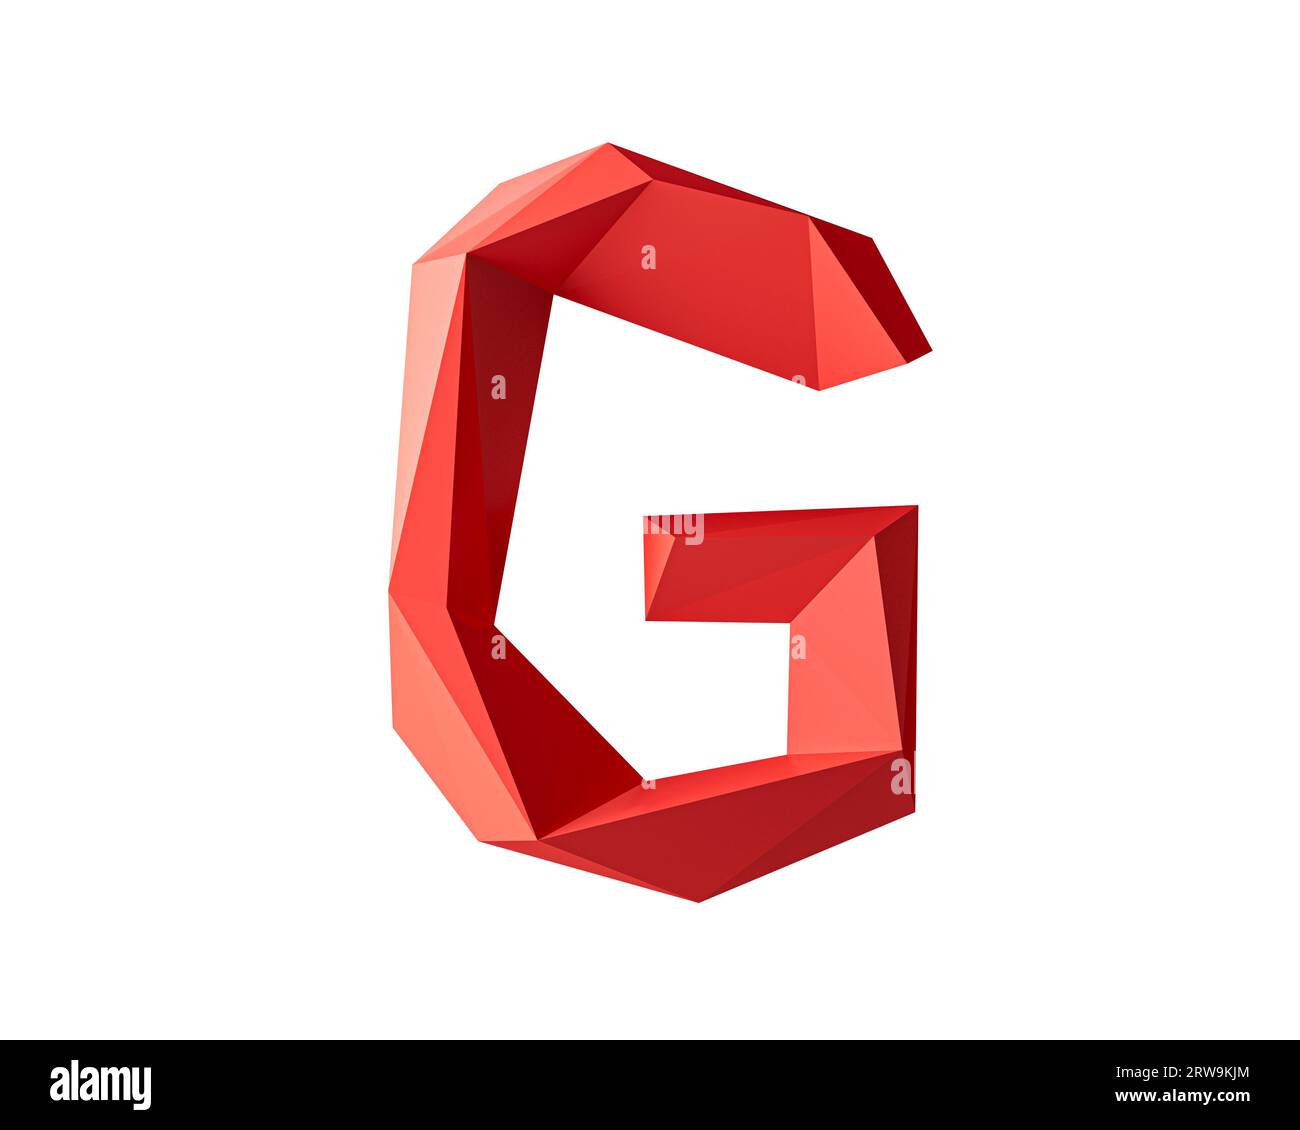 Letters made of low poly red material. 3d illustration of simple polygonal alphabet isolated on white background Stock Photo